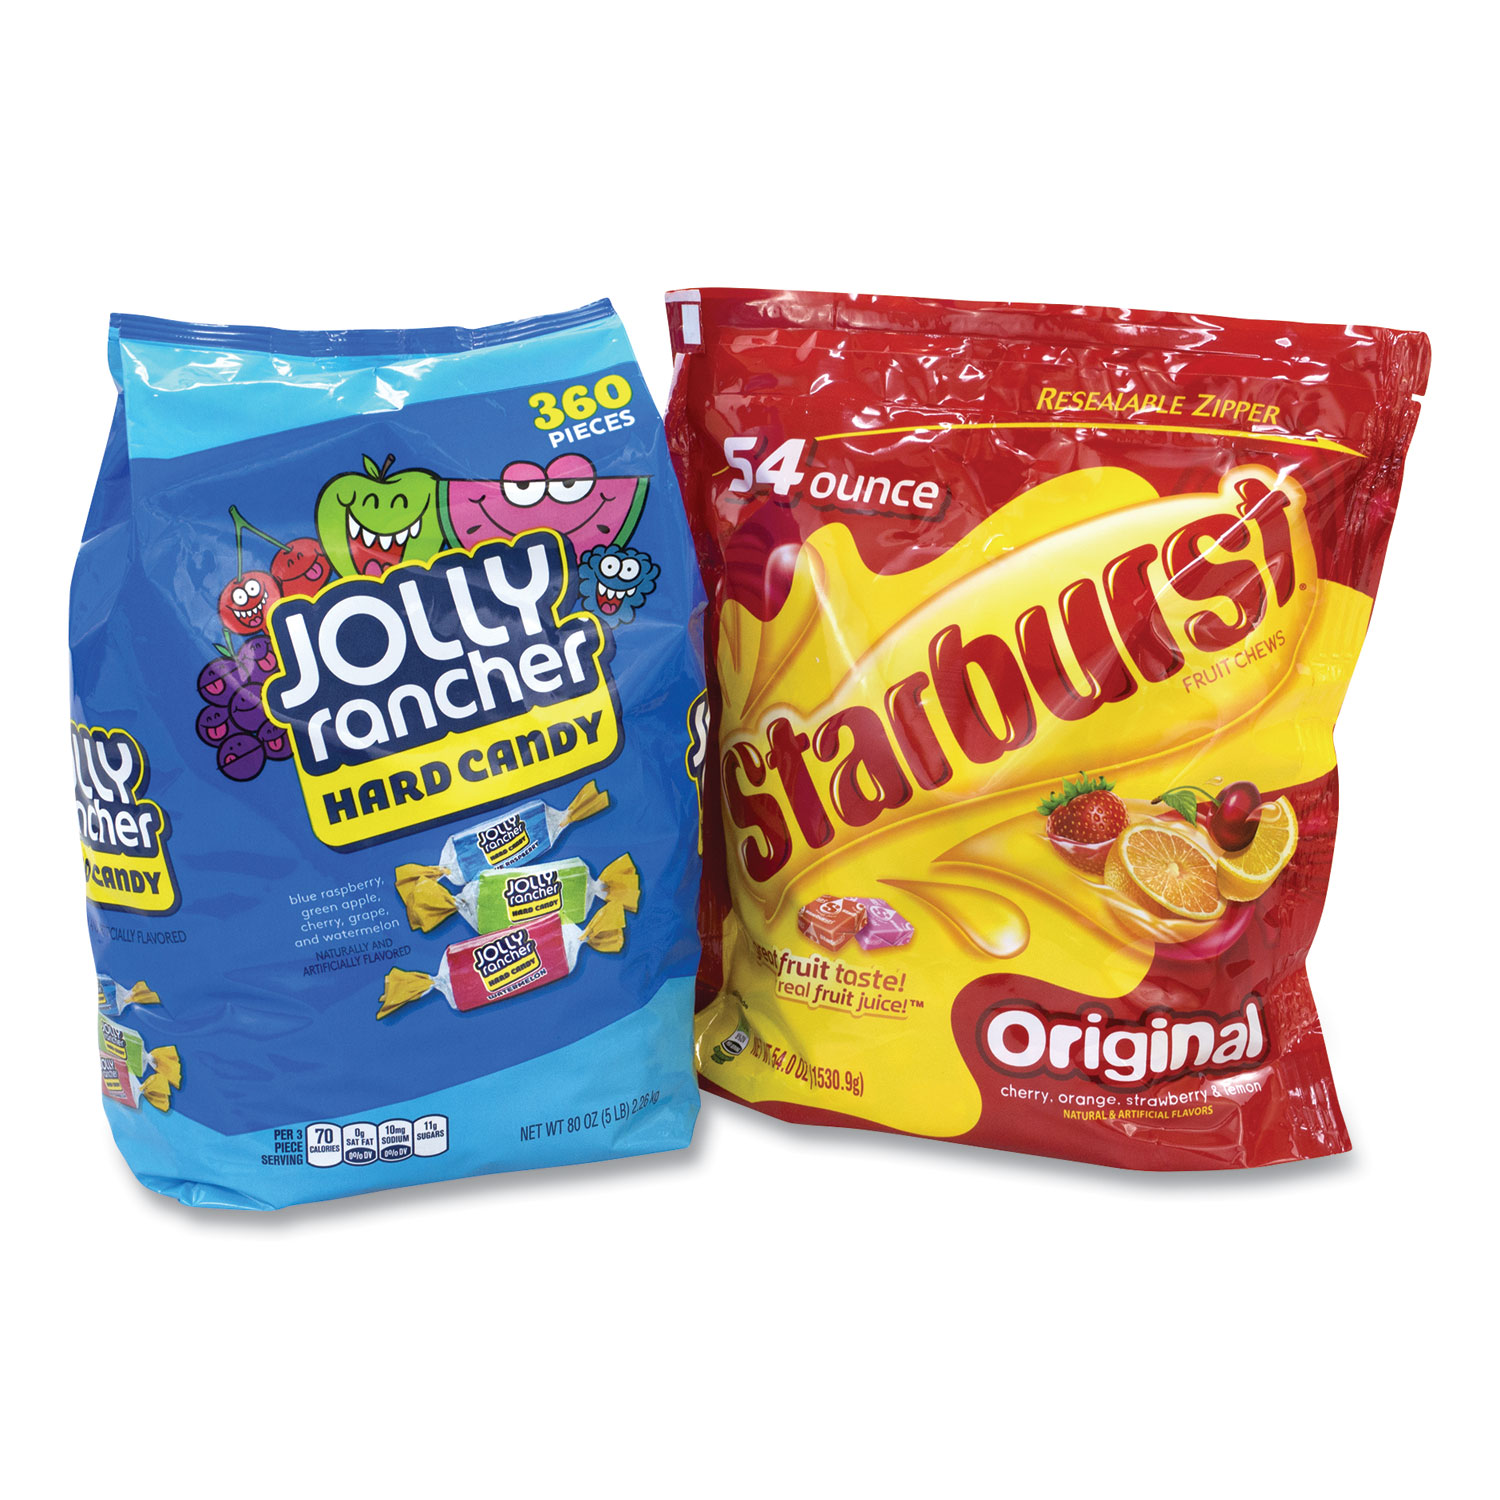  National Brand 600B0003 Chewy and Hard Candy Party Asst, Jolly Rancher/Starburst, 8.5 lbs Total, 2 Bag Bundle, Free Delivery in 1-4 Business Days (GRR600B0003) 